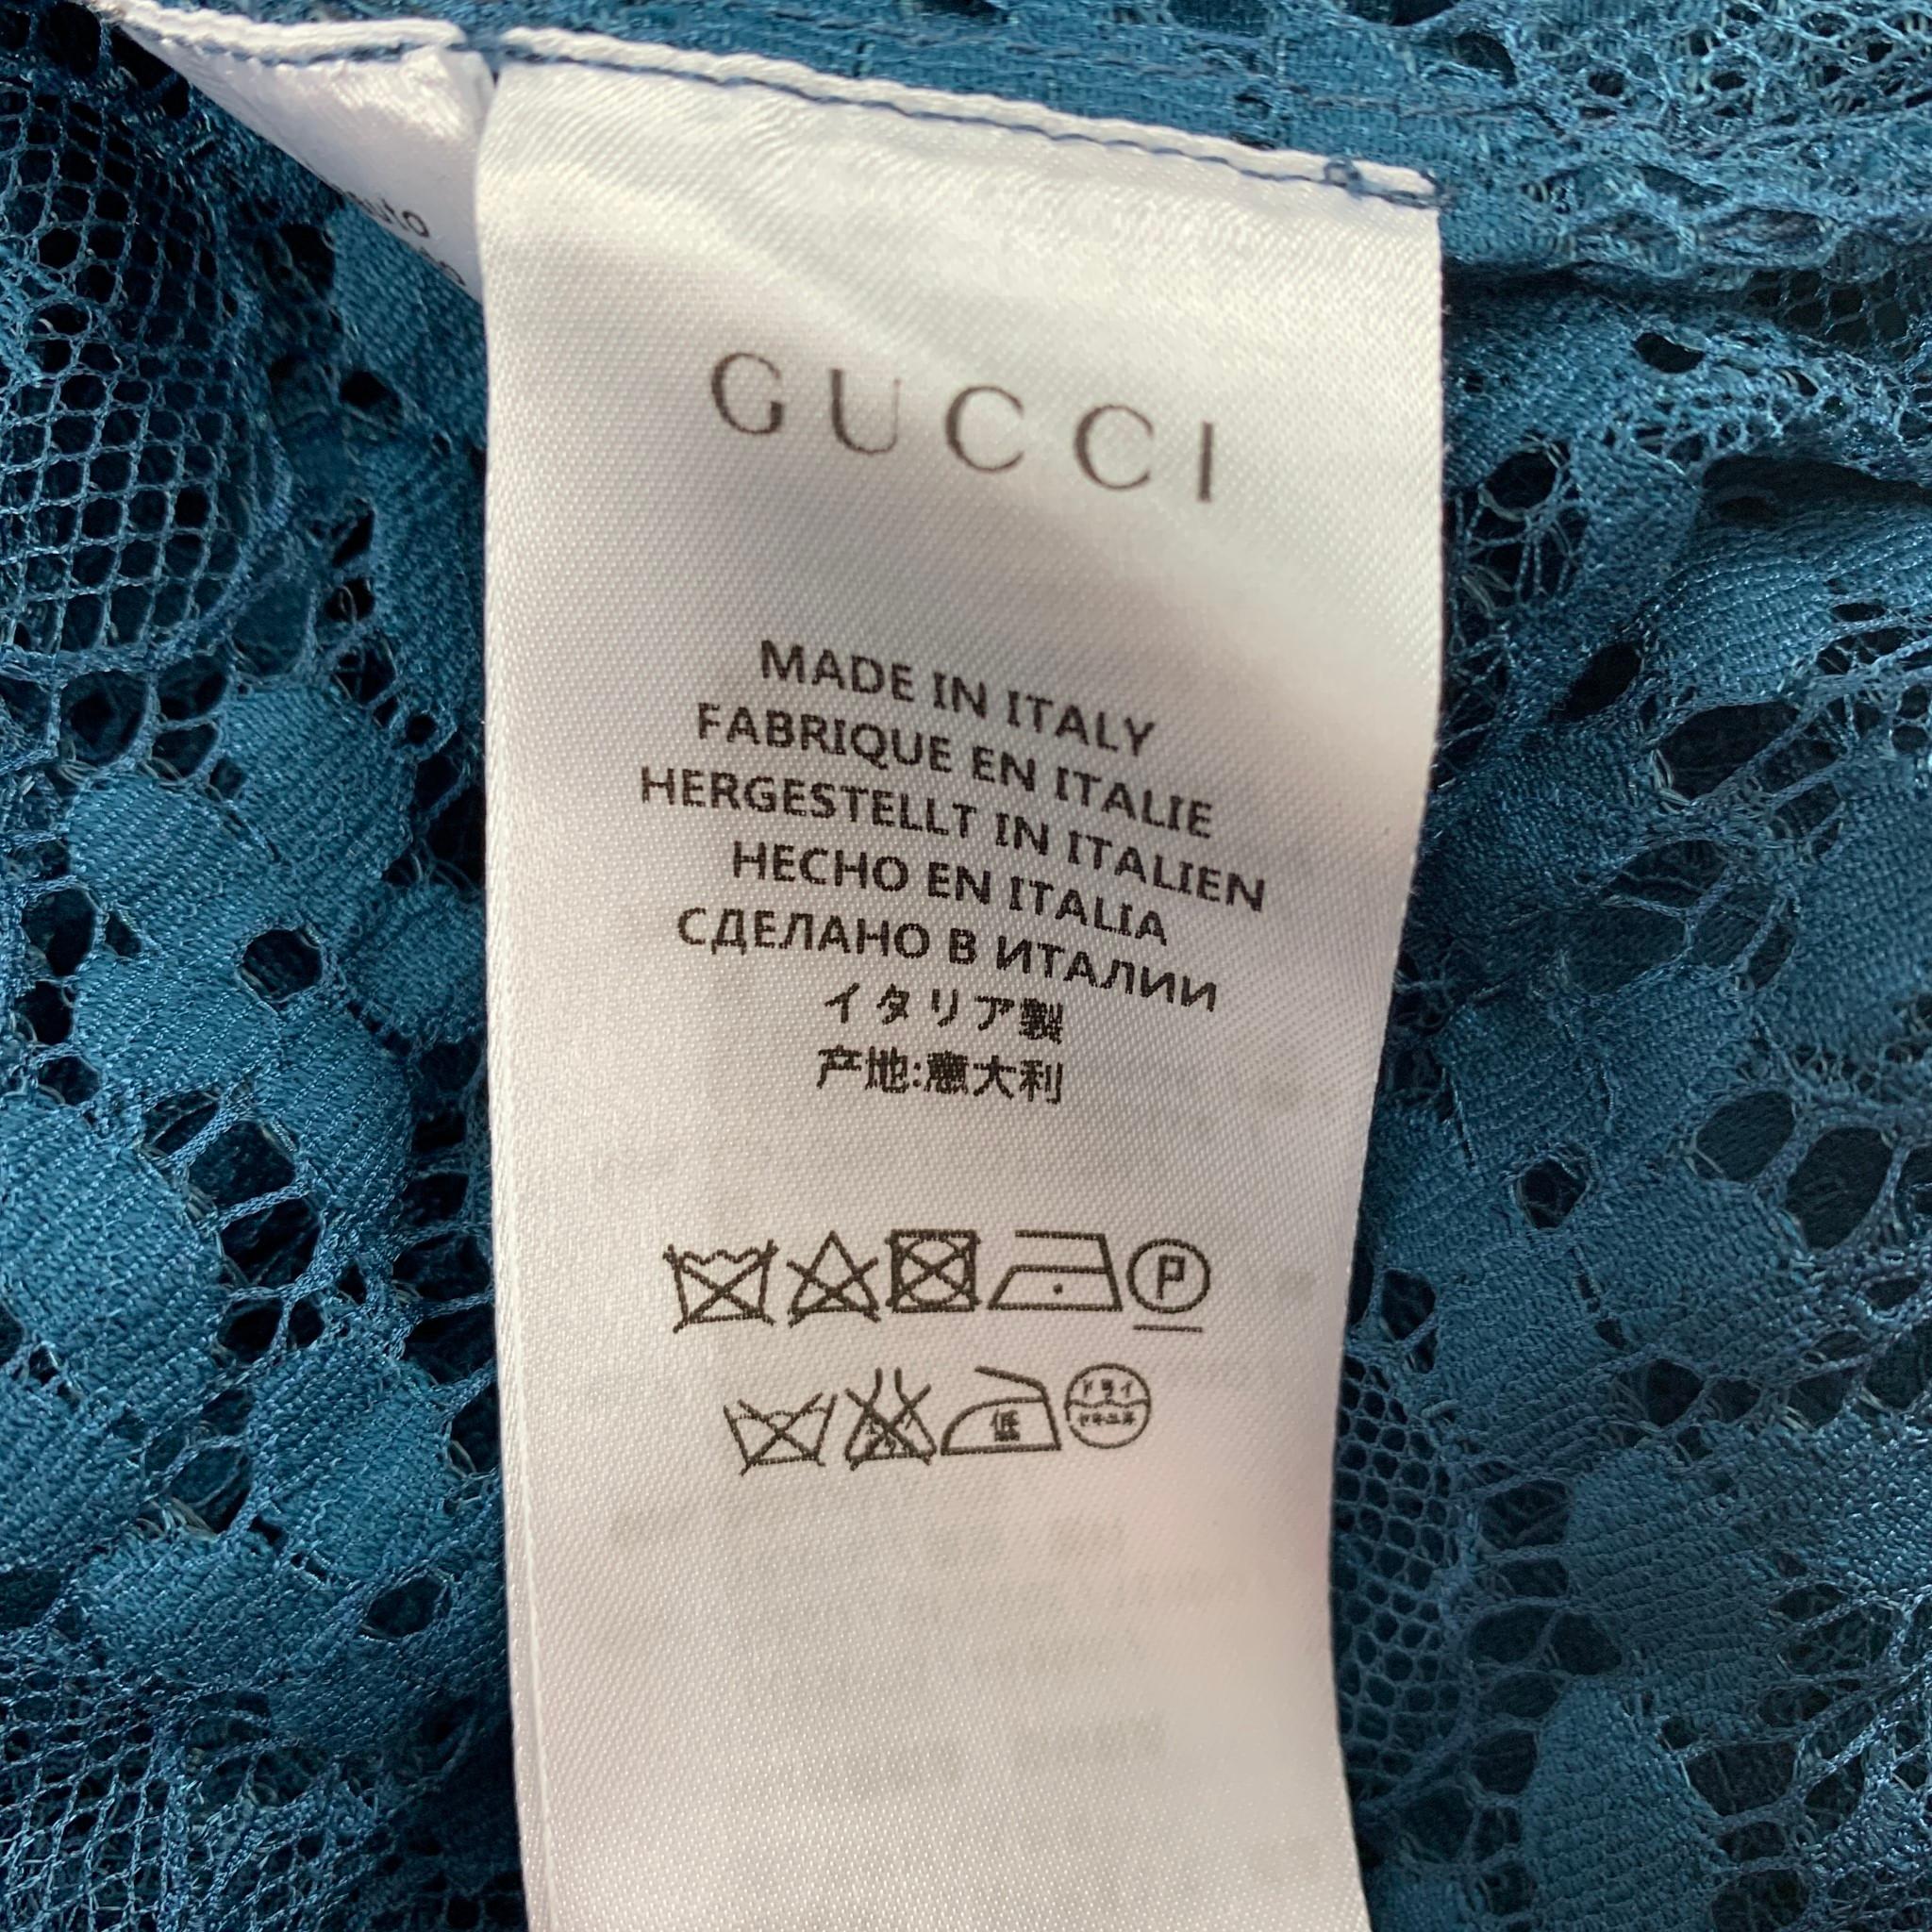 Blue GUCCI S/S 16 Size L Teal Sheer Lace Embroidered Polyamide Blend Shirt